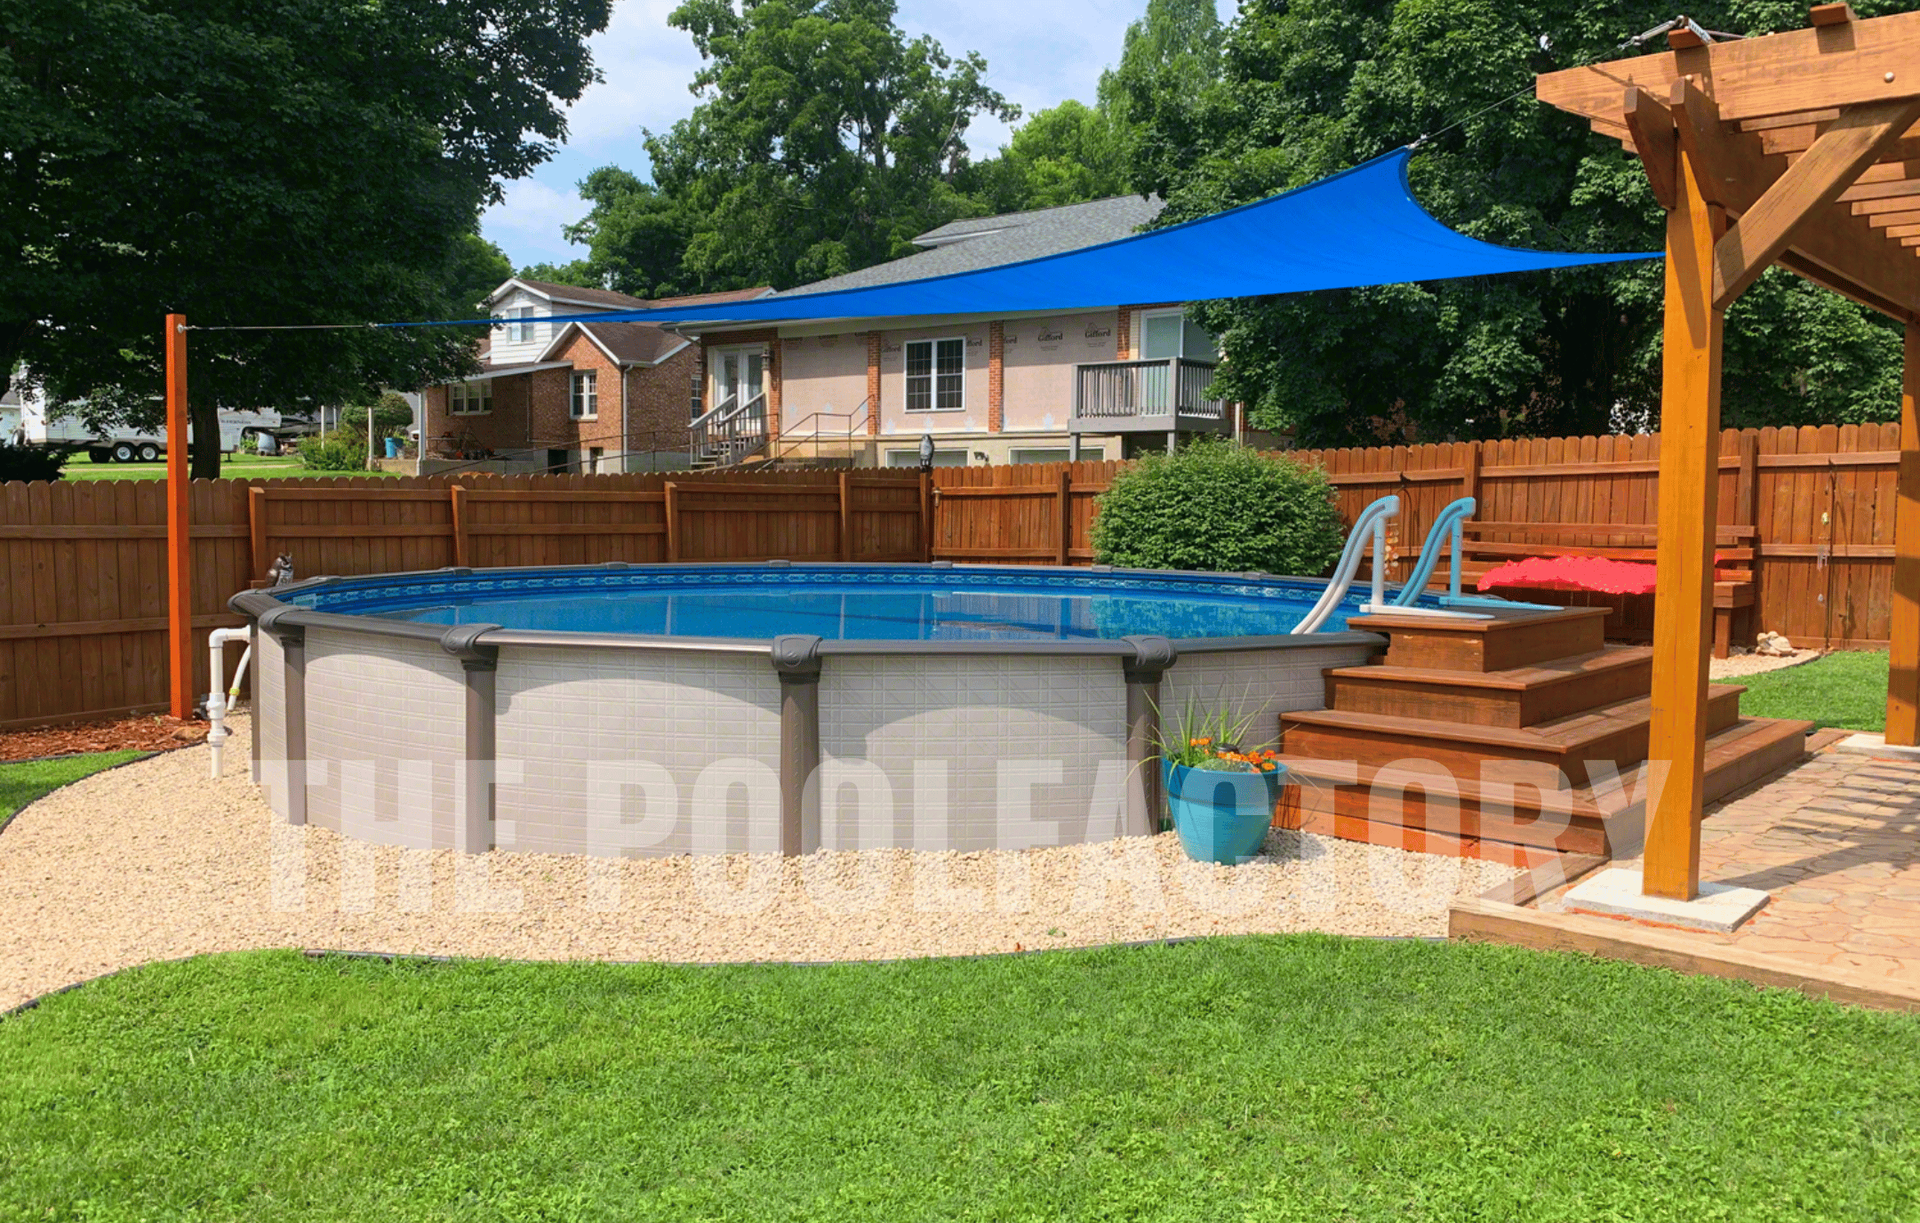 above-ground-pools-shade-ideas-melenia.png__PID:fbc7d790-ee0e-4688-84a2-0cefc8199dcb